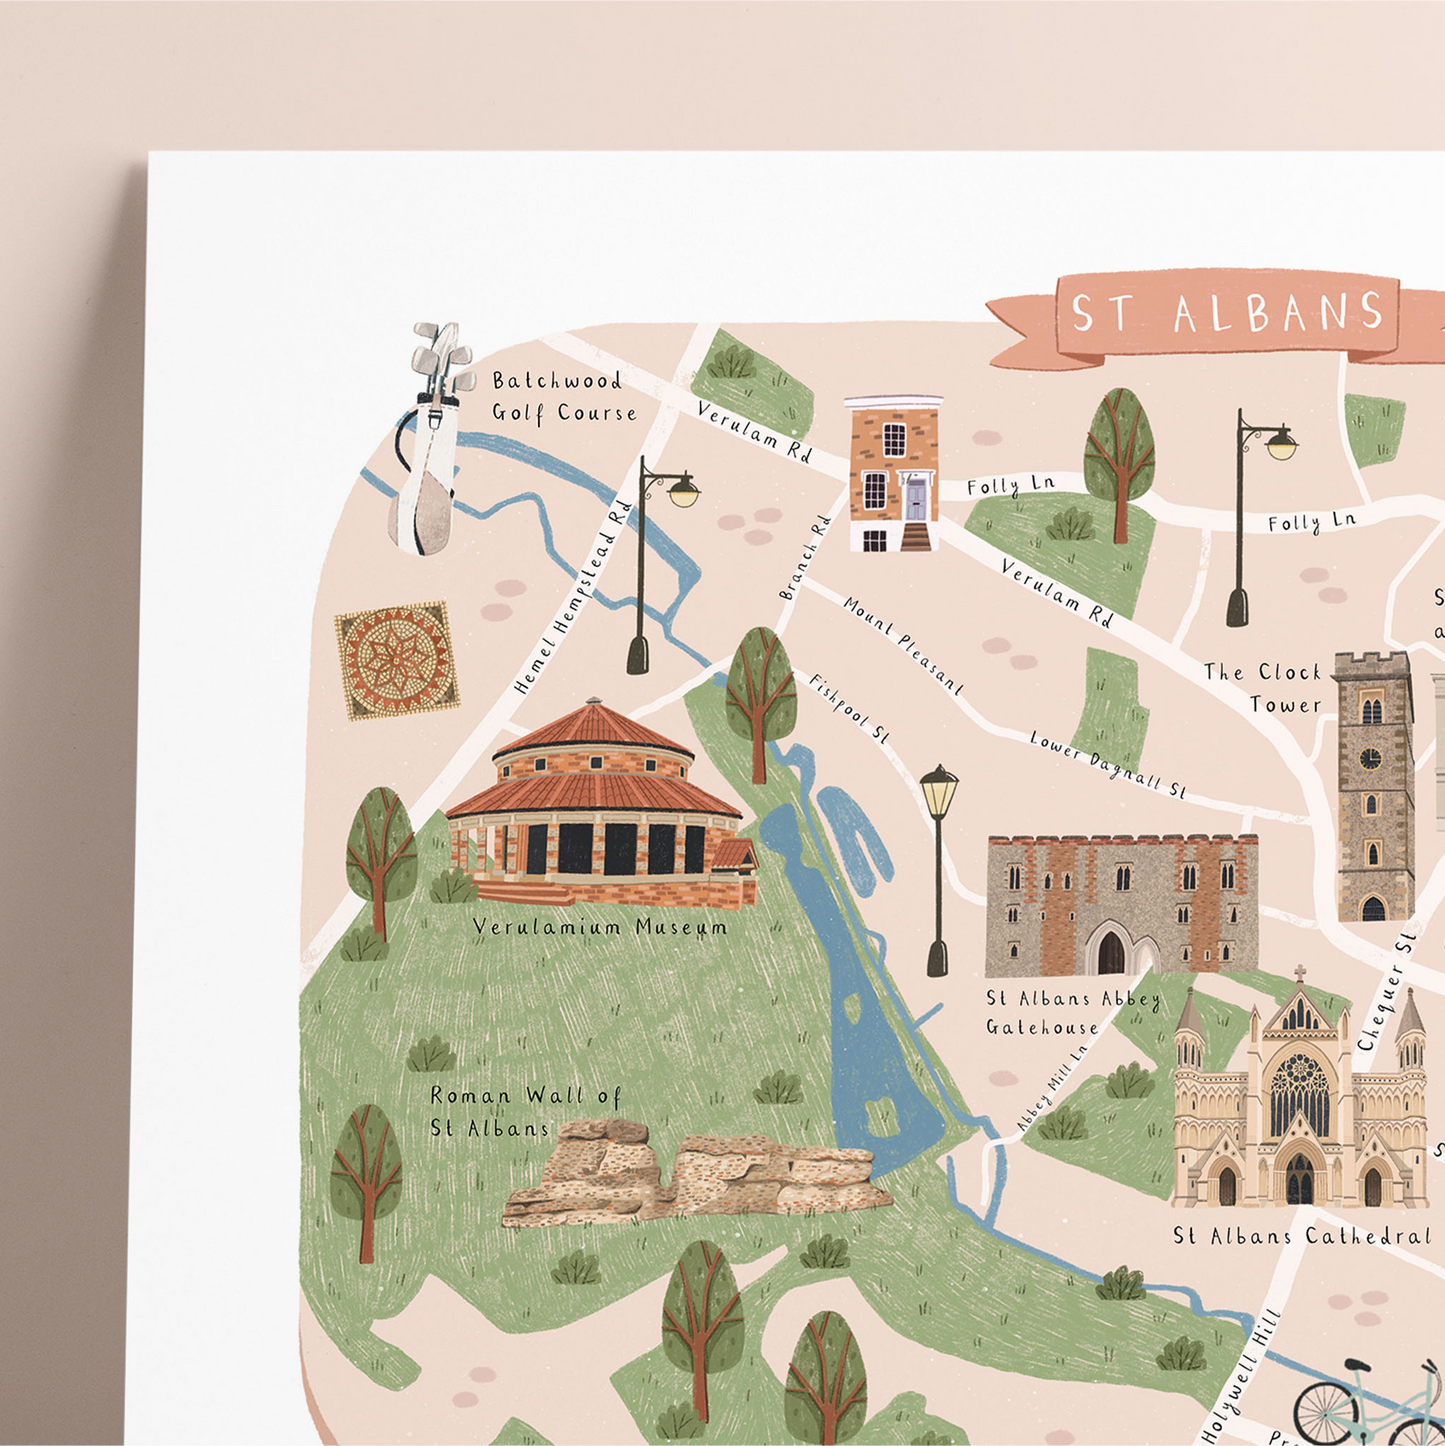 St Albans Illustrated Map